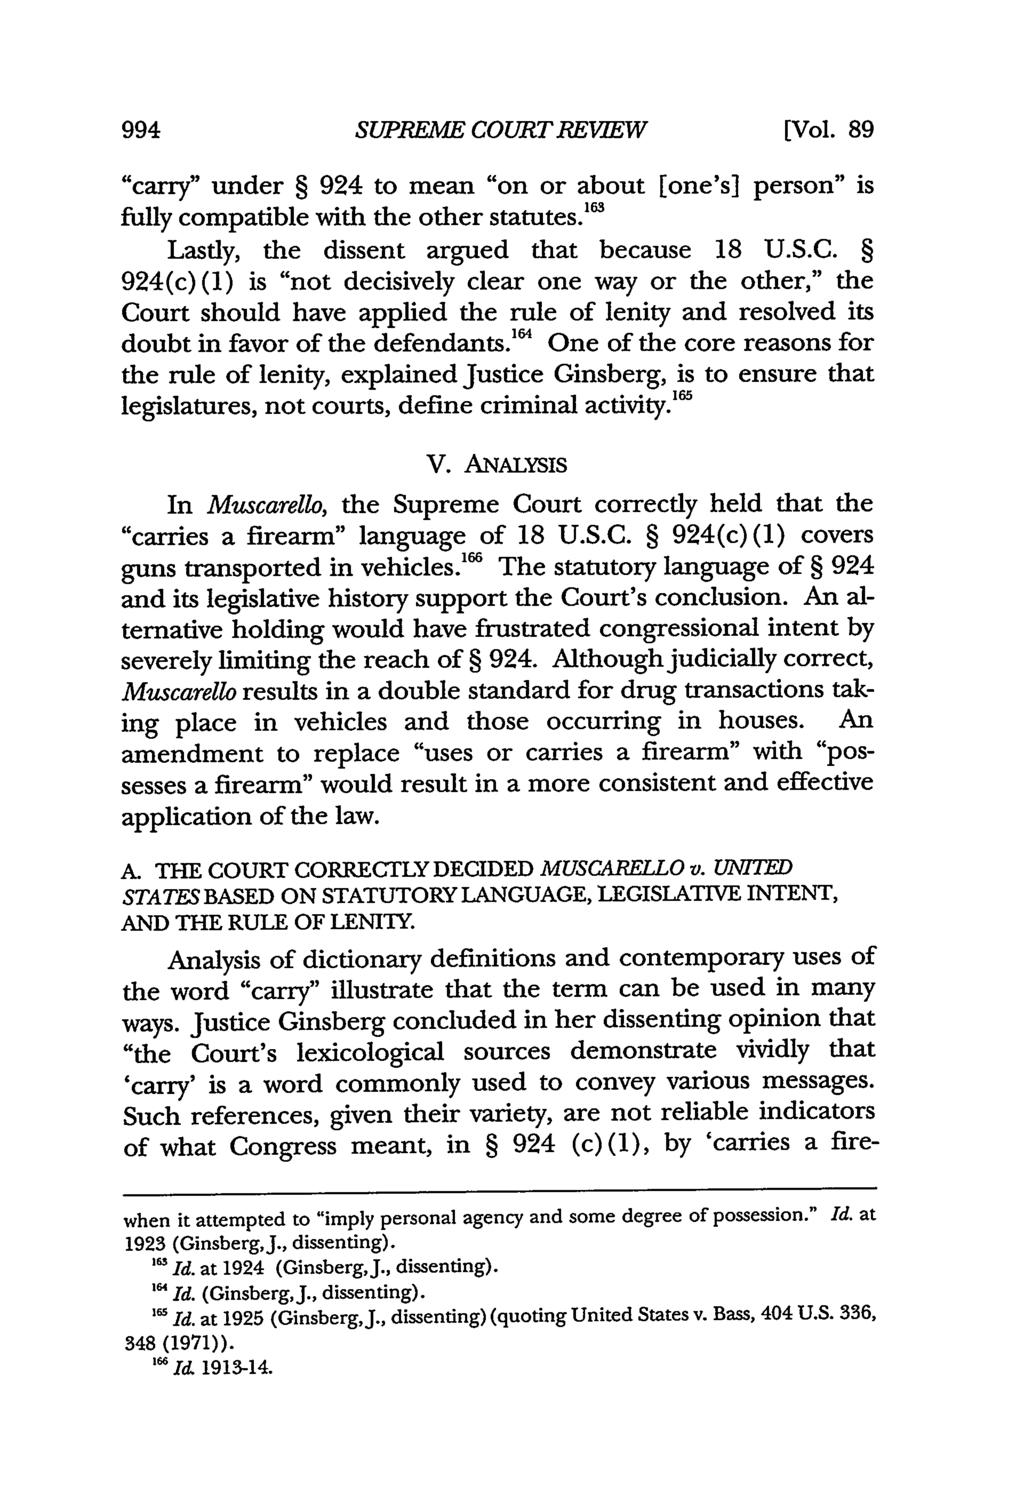 994 SUPREME COURT REVIEW [Vol. 89 "carry" under 924 to mean "on or about [one's] person" is fully compatible with the other statutes." Lastly, the dissent argued that because 18 U.S.C. 924(c) (1) is "not decisively clear one way or the other," the Court should have applied the rule of lenity and resolved its doubt in favor of the defendants.